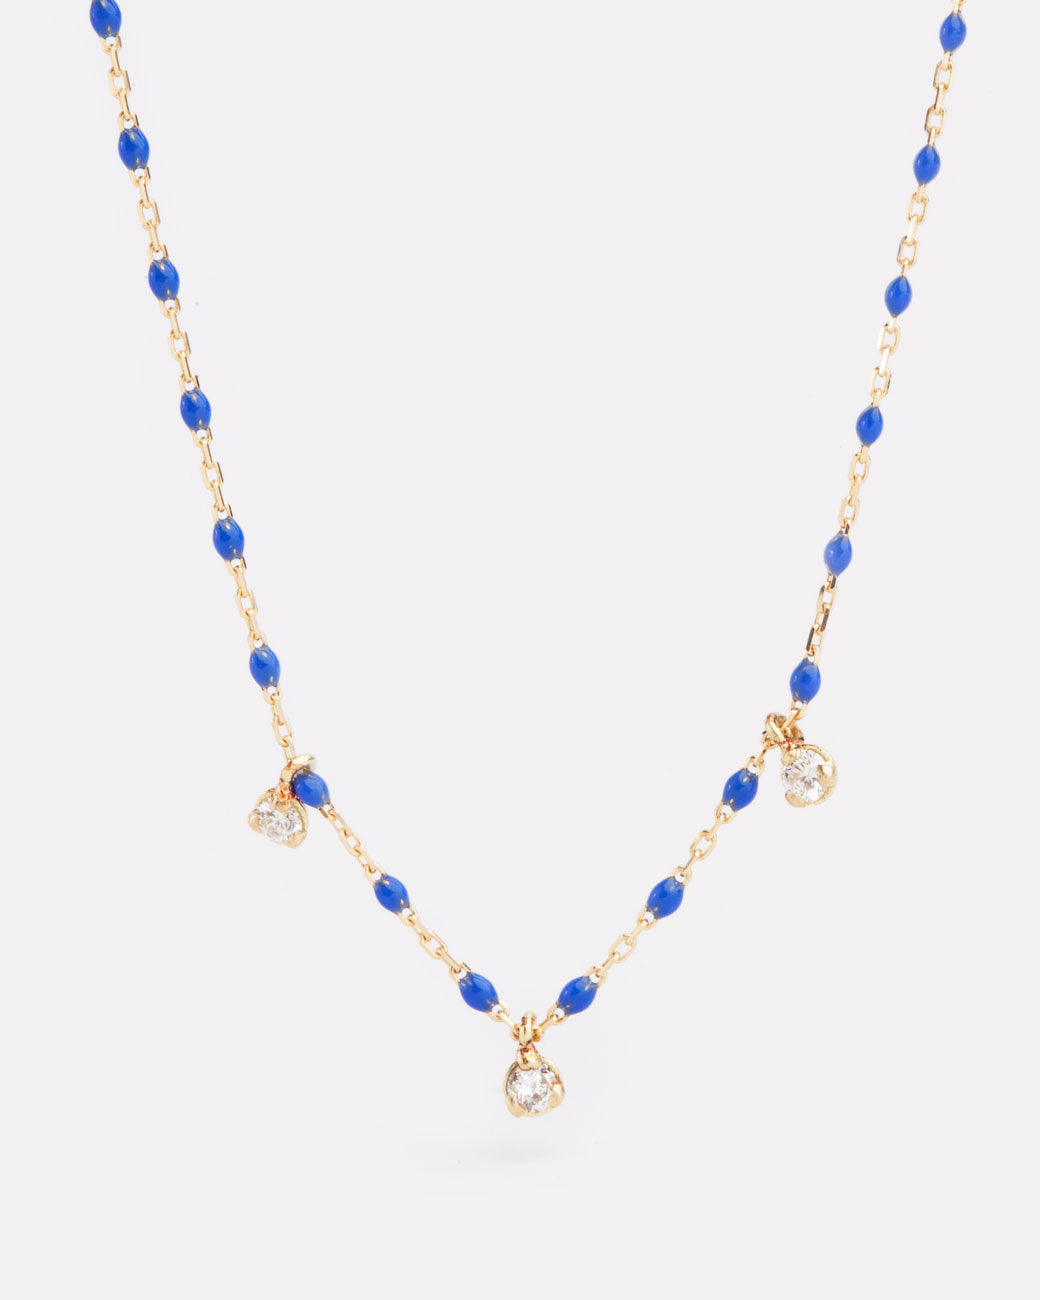 Close up birds eye view of yellow gold chain necklace with small blue resin beads with three diamond pendants alternating every two beads from the bottom of the necklace.